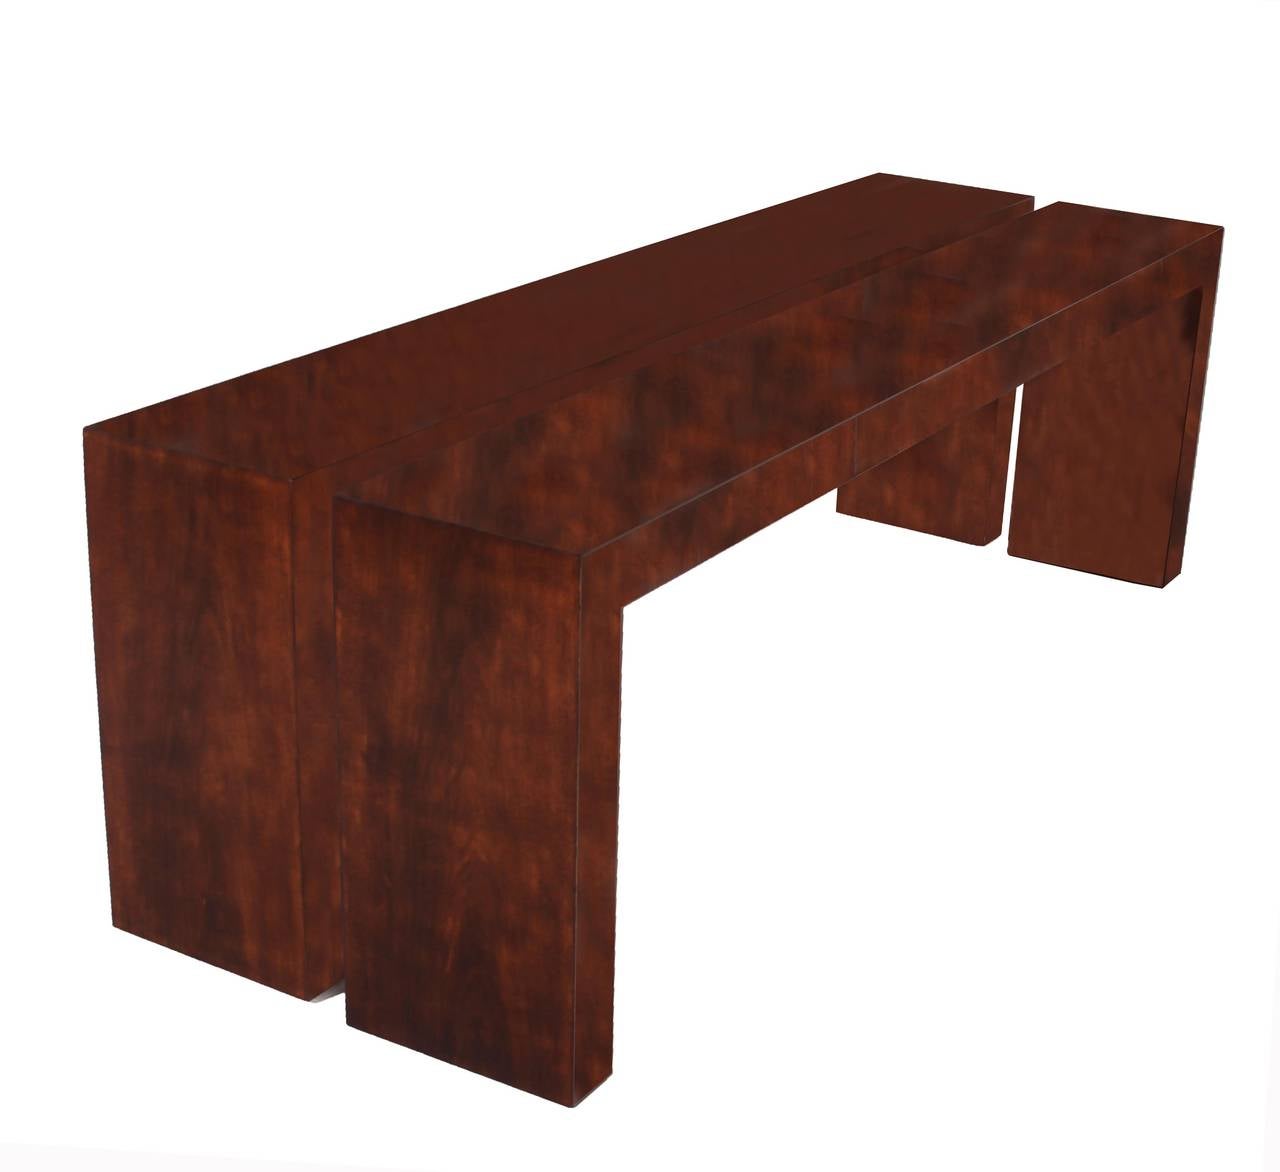 Minimalist Imbuia Console Tables from Brazil In Good Condition For Sale In Hollywood, CA